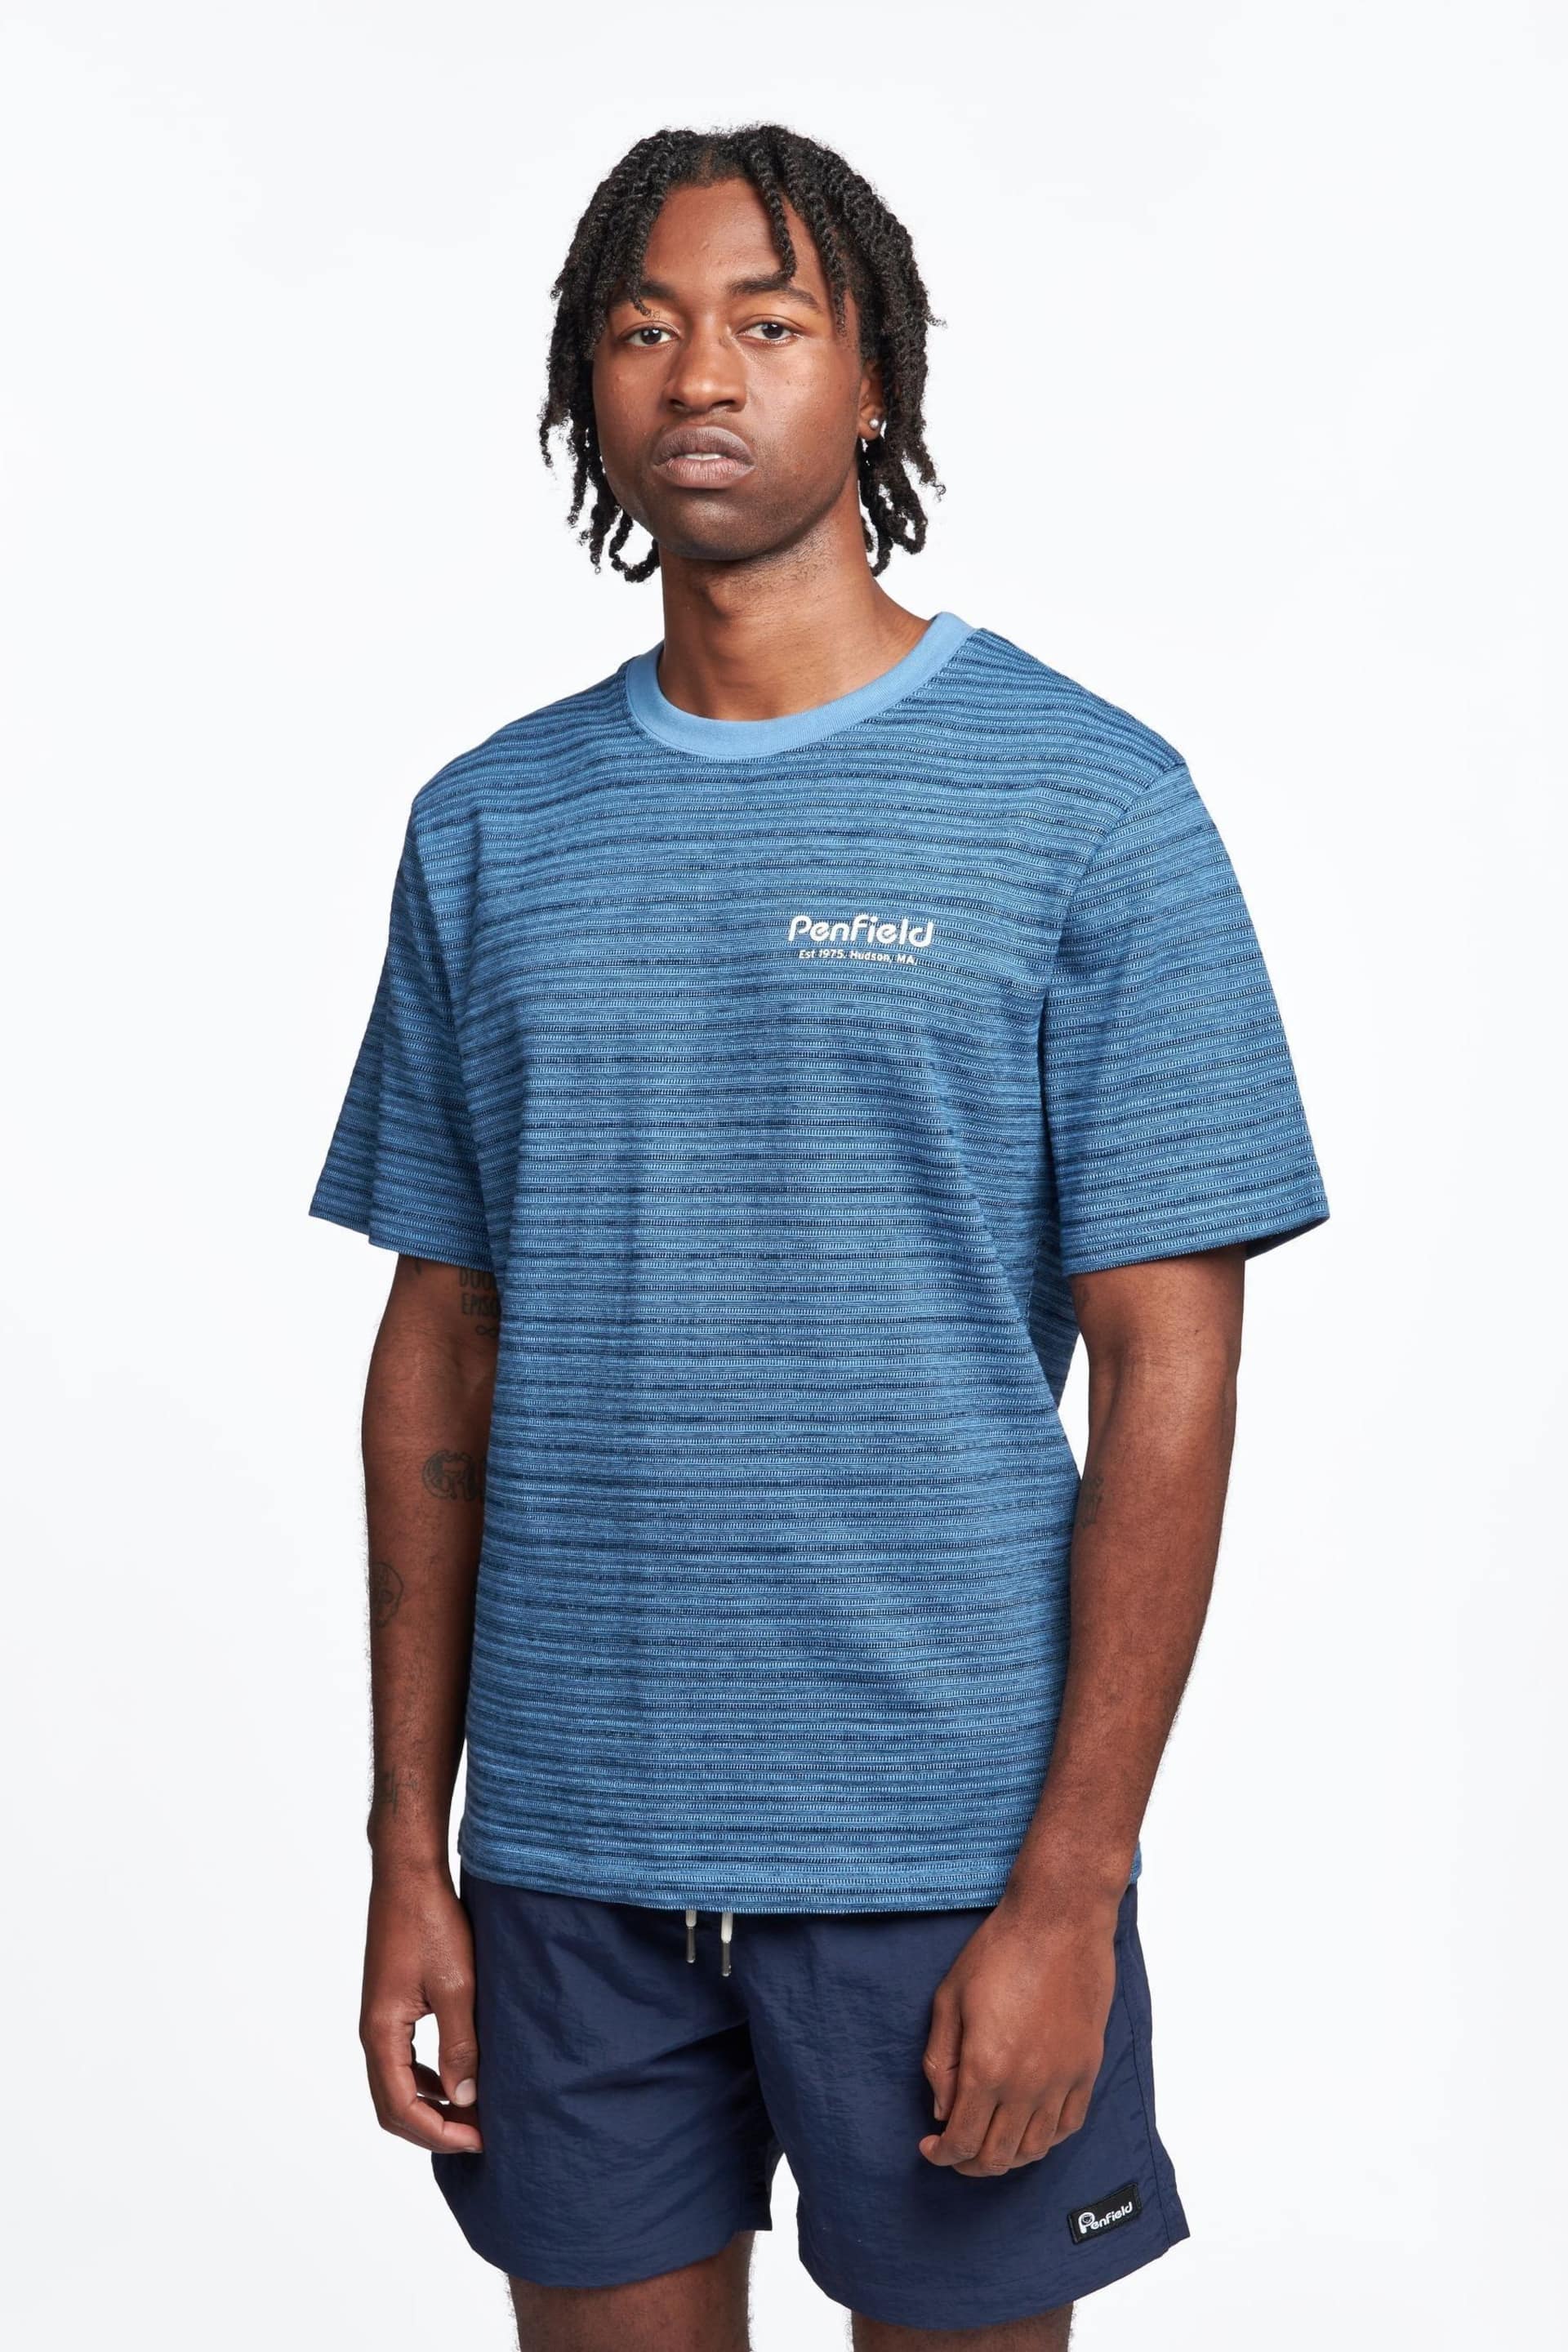 Penfield Blue Textured Striped T-Shirt - Image 1 of 5